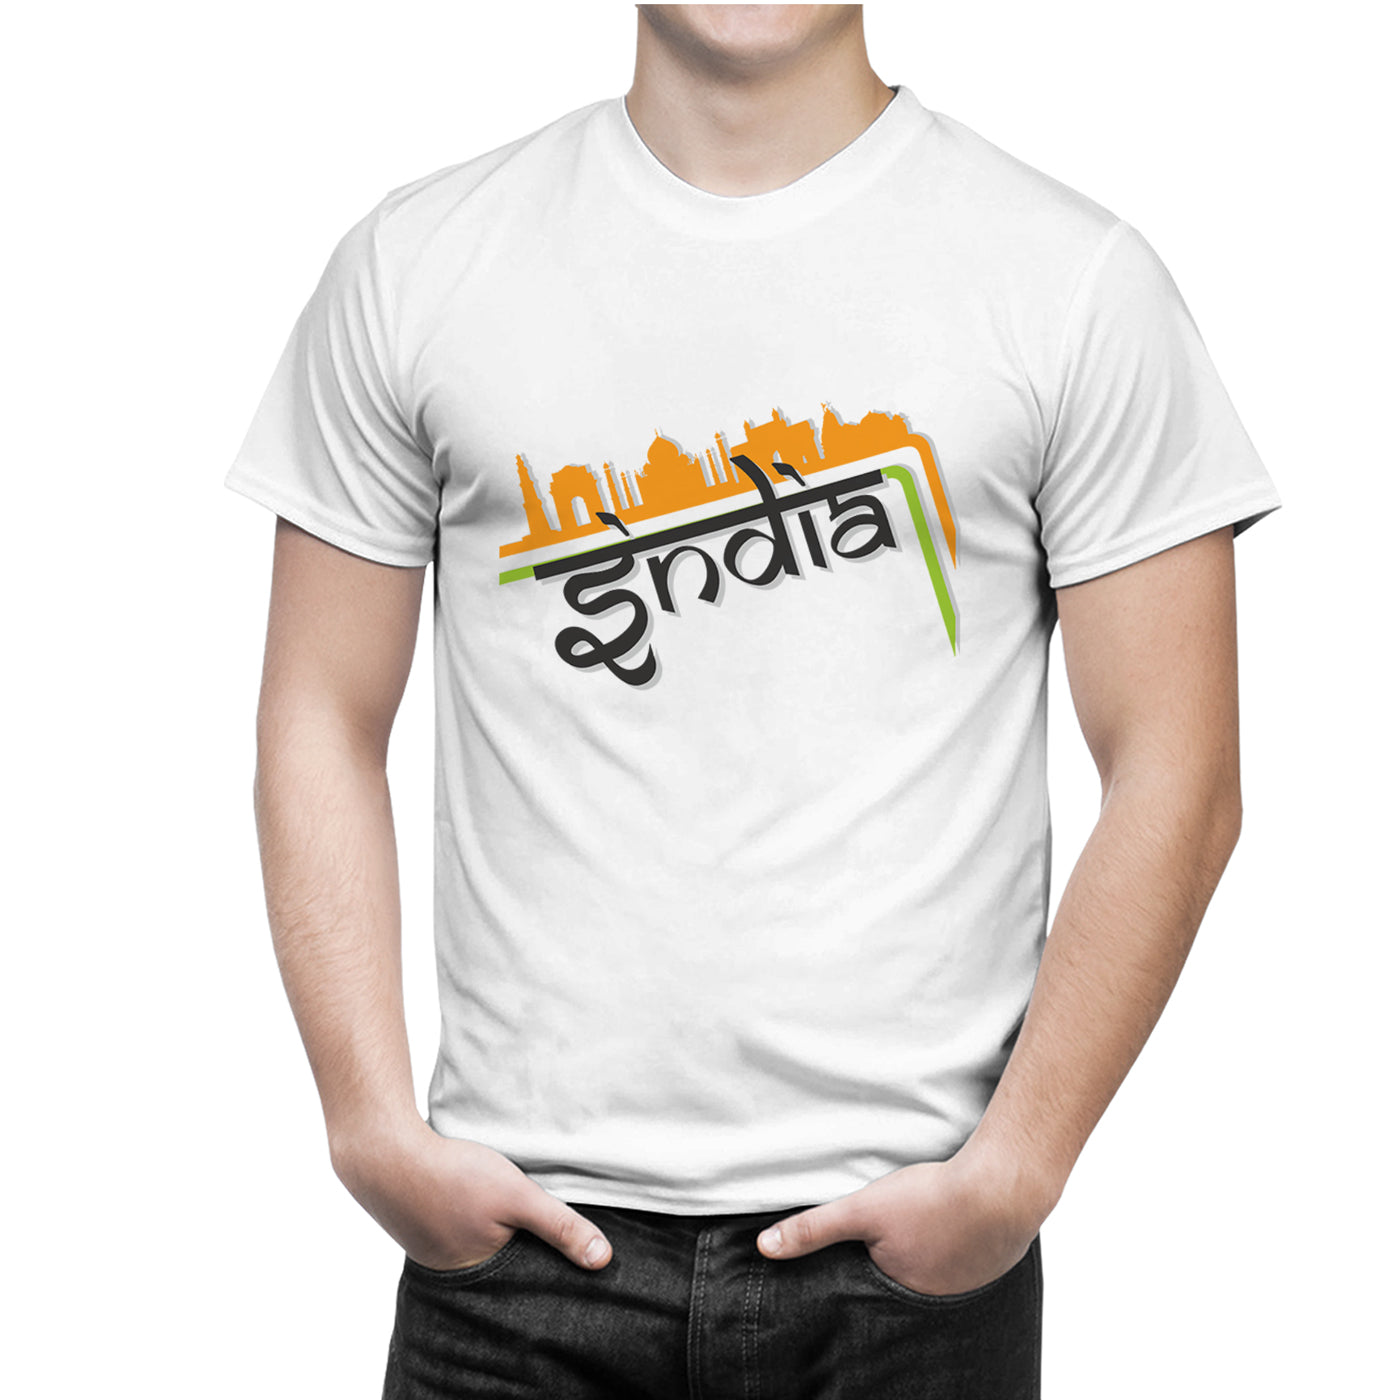 iberry's Independence day t shirt | Republic day t shirts |India t shirts |Patriotic tshirt |15 August t shirts |Round neck cotton tshirts -07